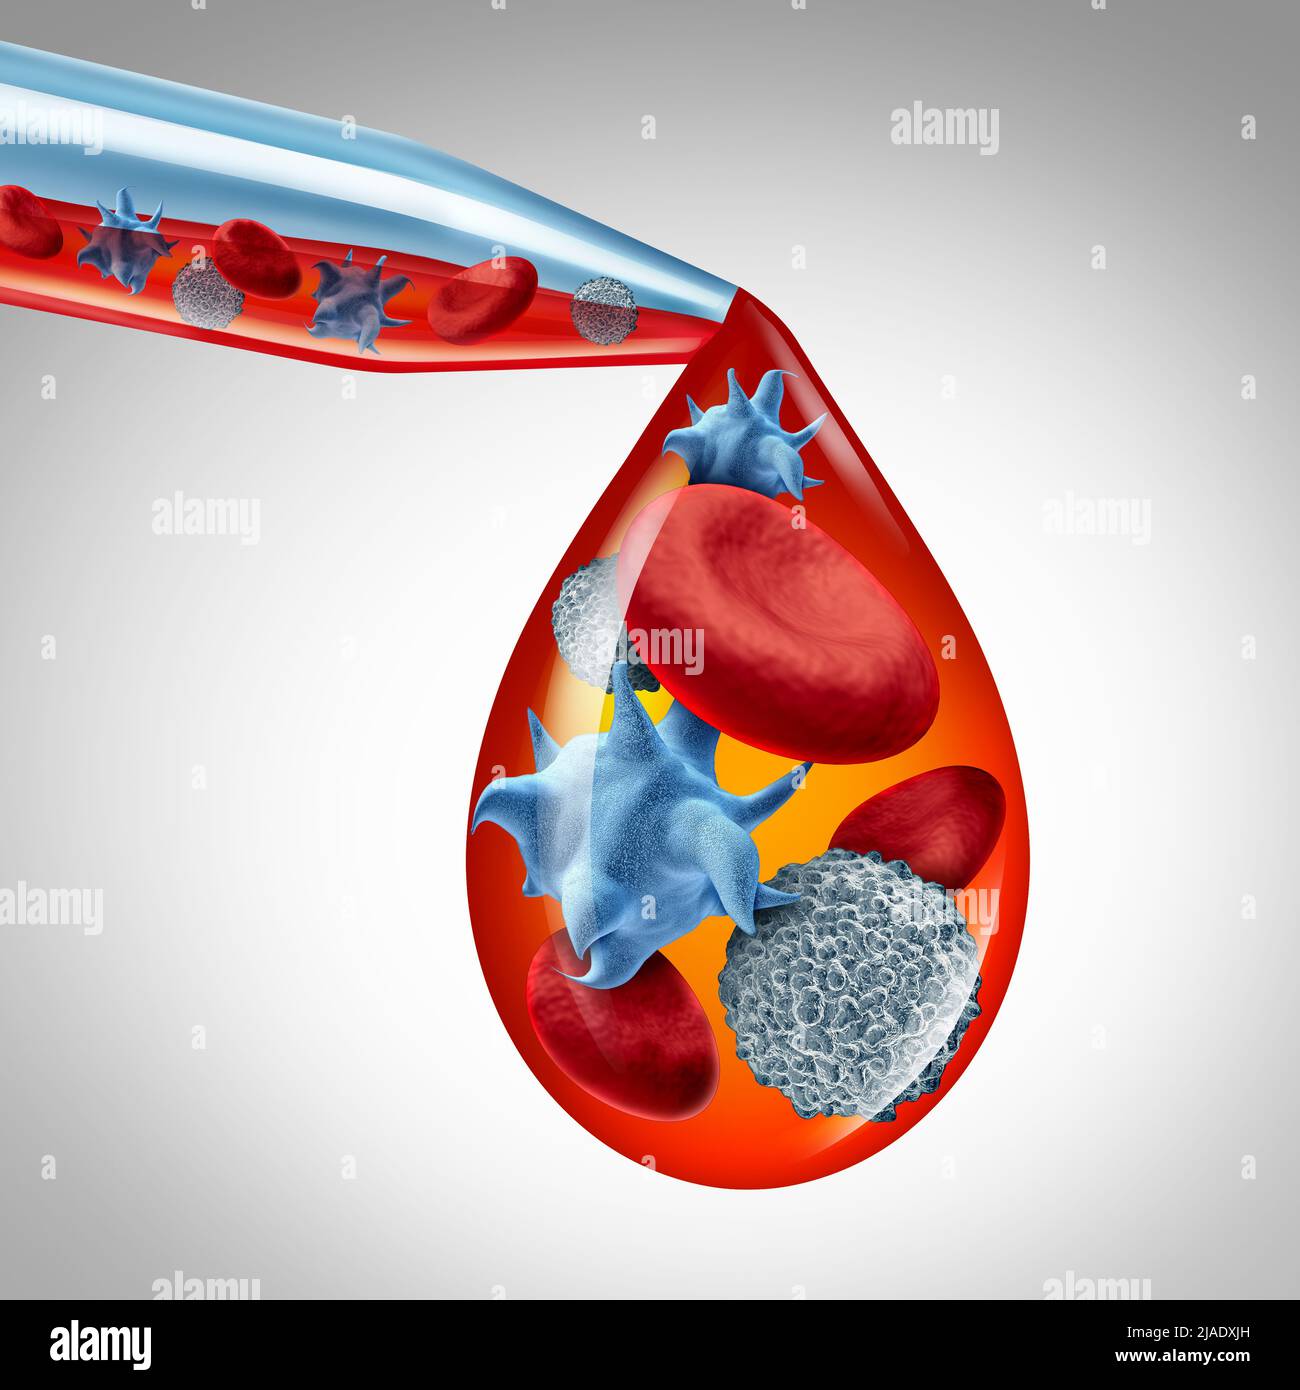 Blood cells with Platelets and thrombocytes or white cell anatomy concept with activated platelet symbol. Stock Photo